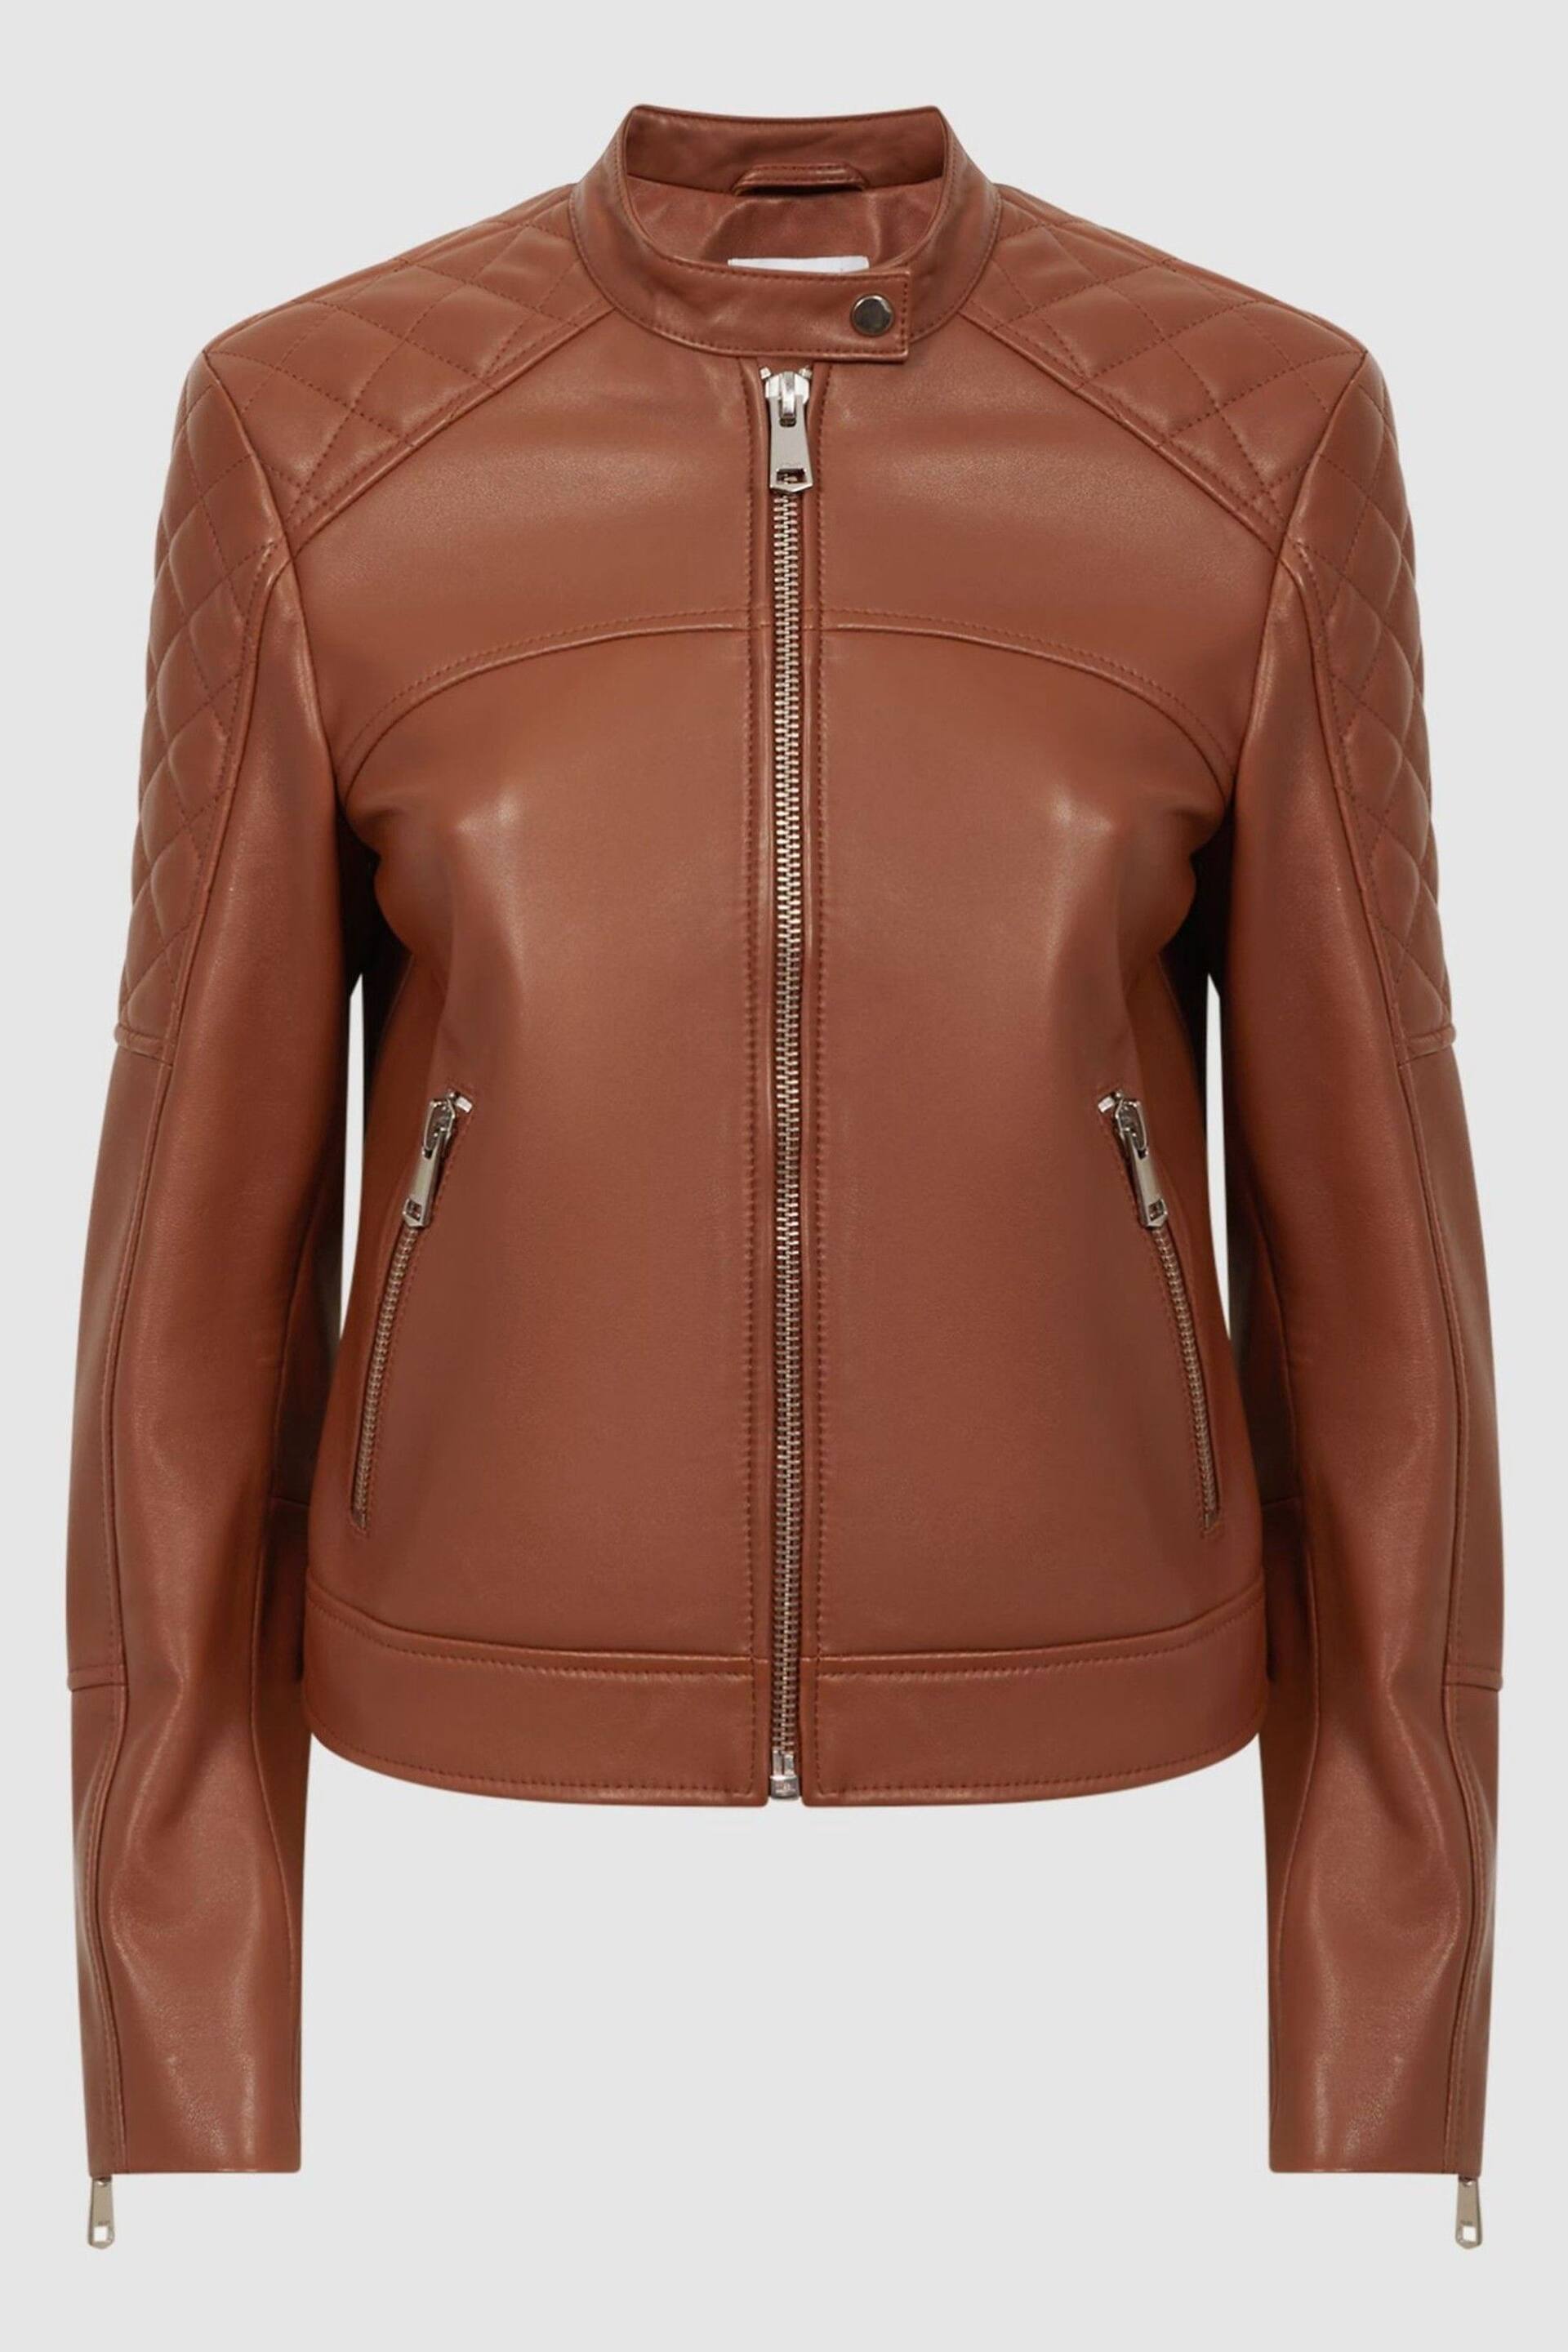 Reiss Tan Adelaide Leather Collarless Quilted Jacket - Image 2 of 5